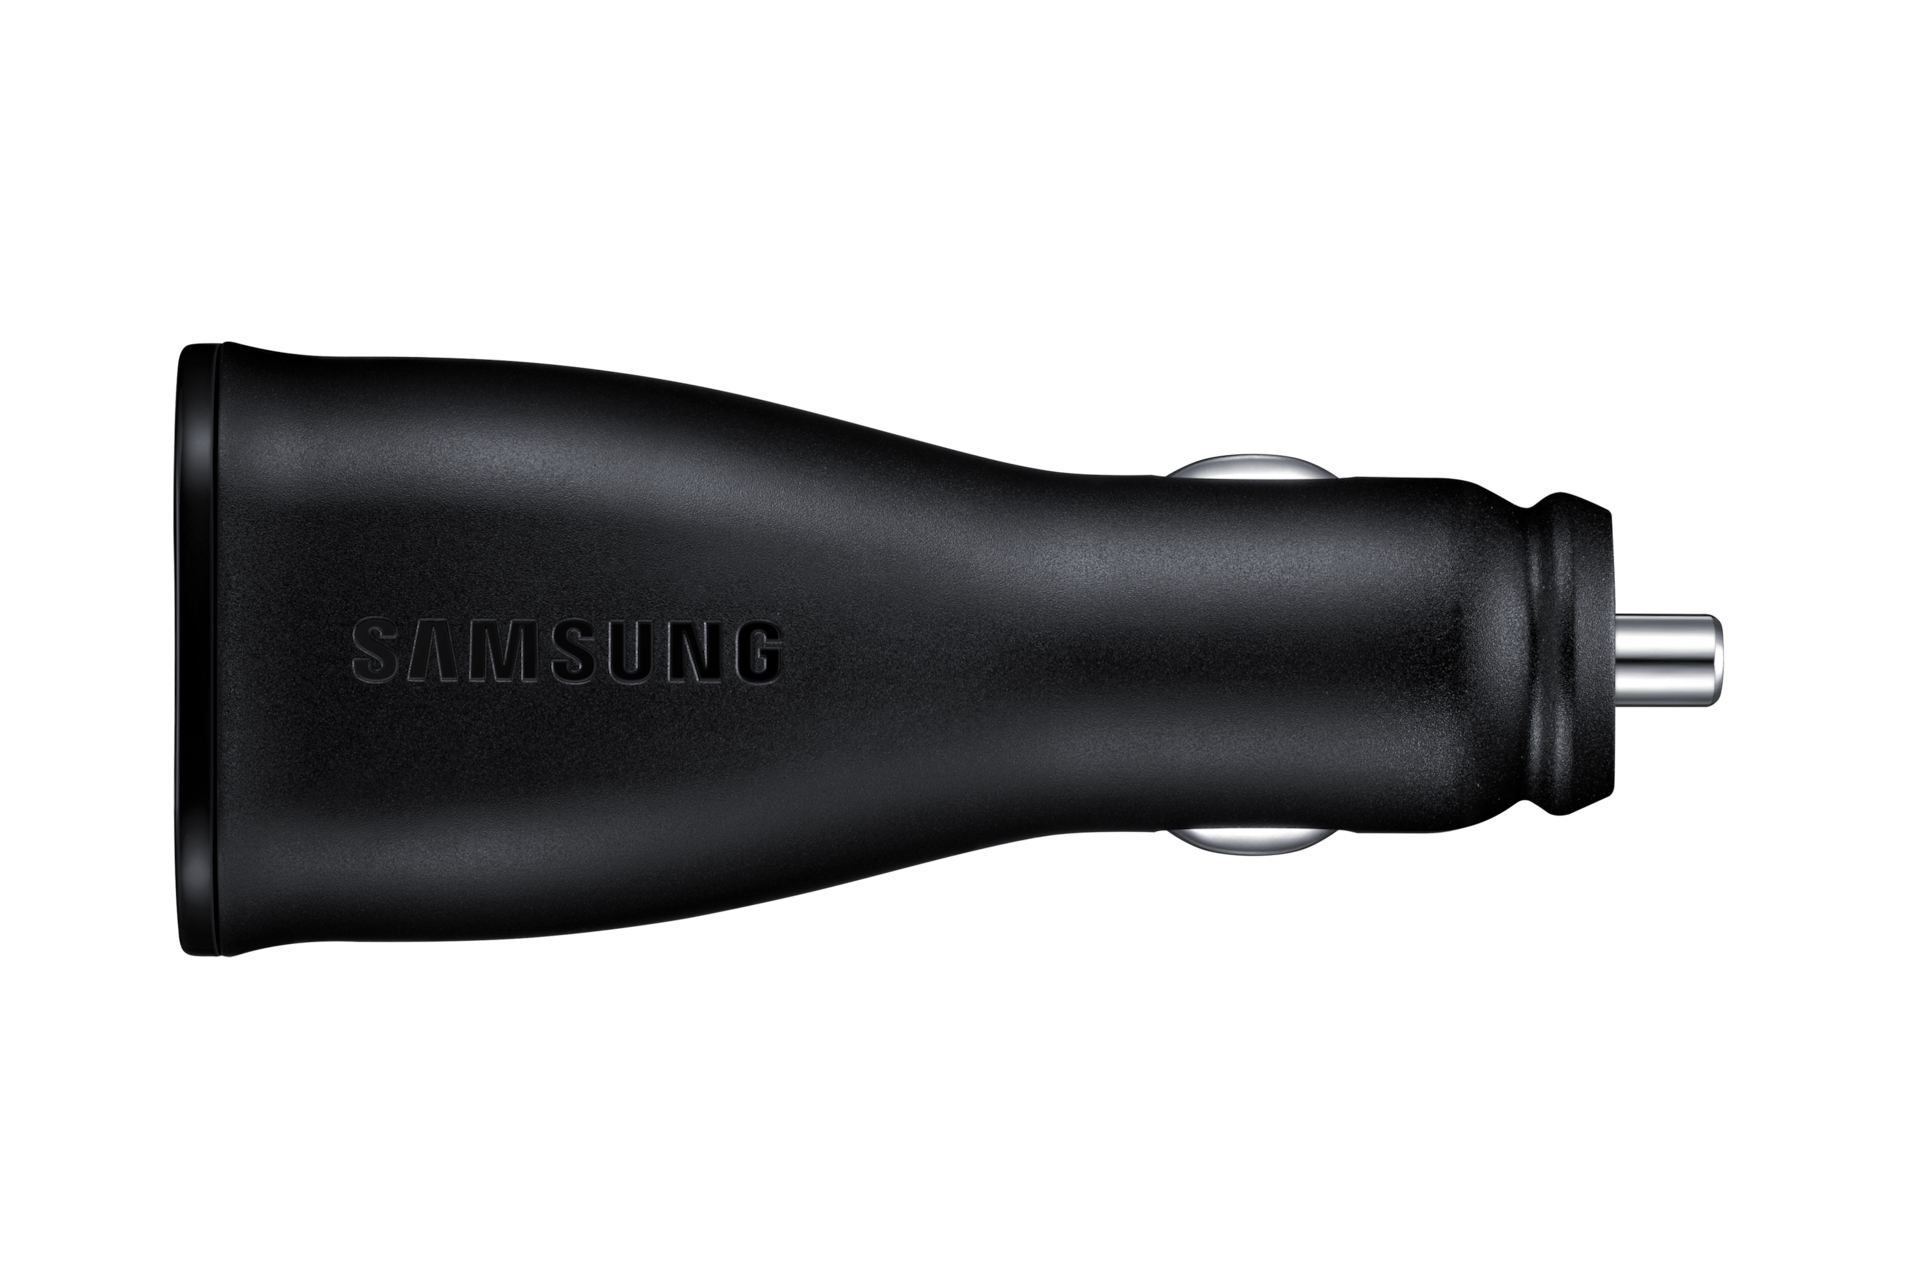 SAMSUNG - Chargeur rapide allume cigare Mini - 2 sorties USB EP